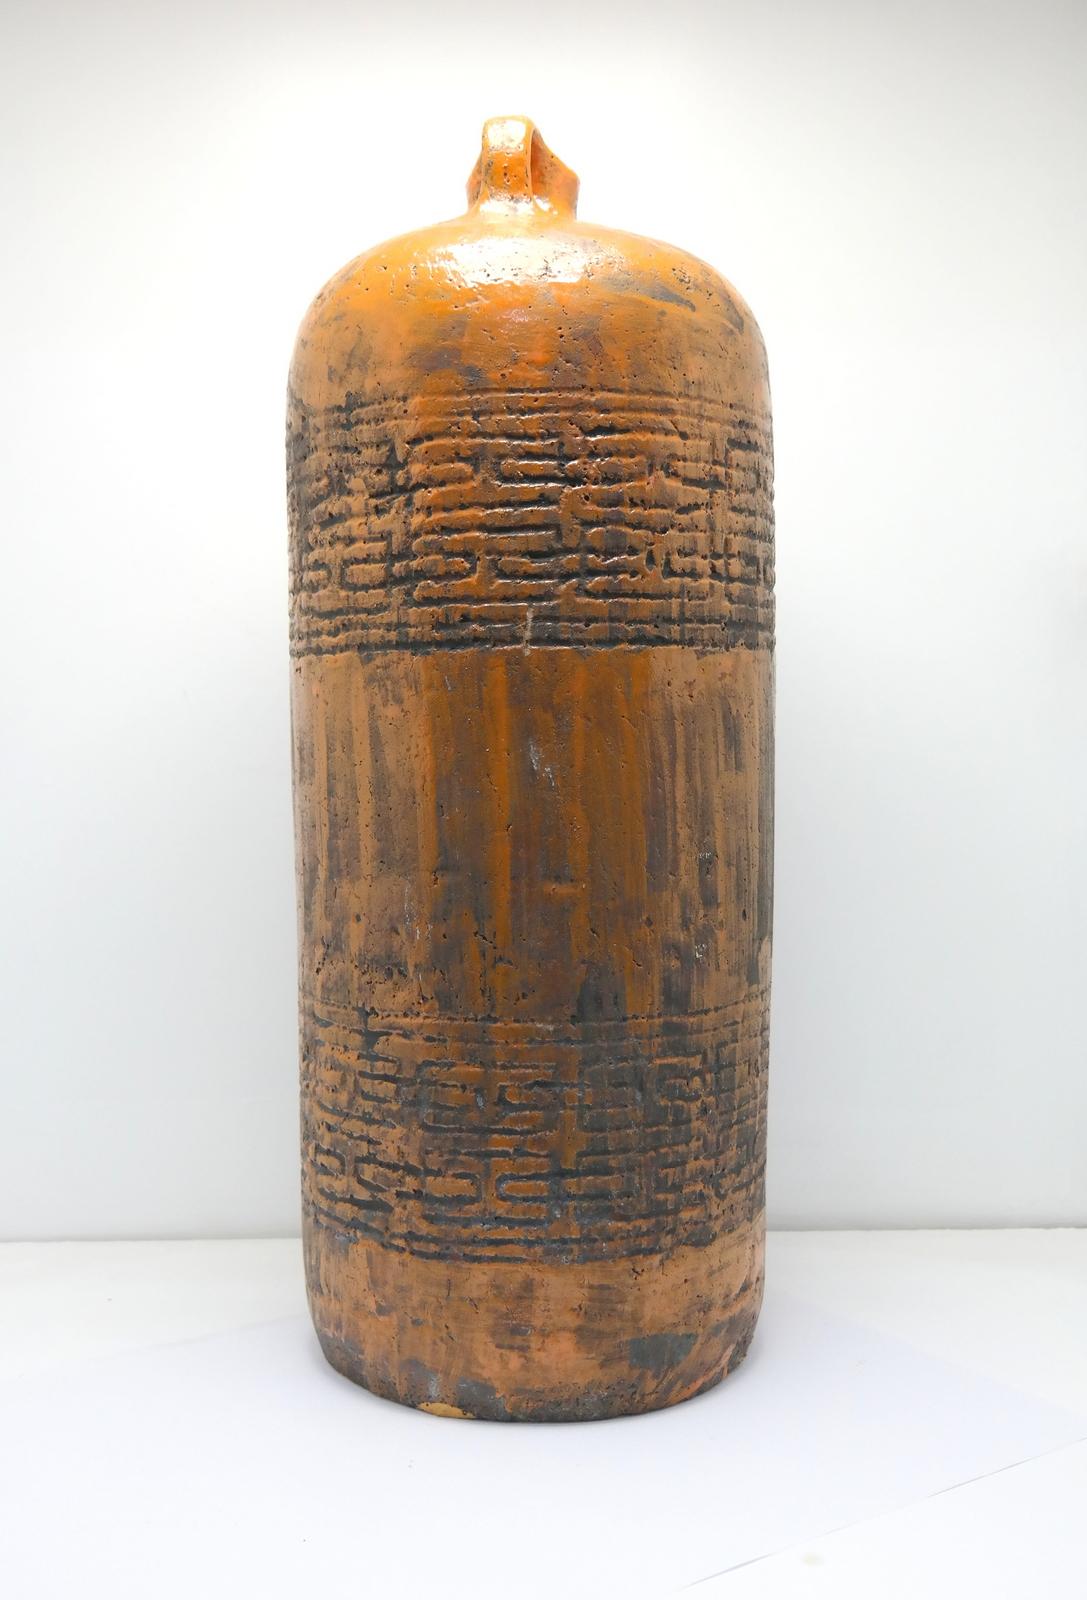 Large fireclay earthenware floor vase by Zsuzsa Hornung, 1972.